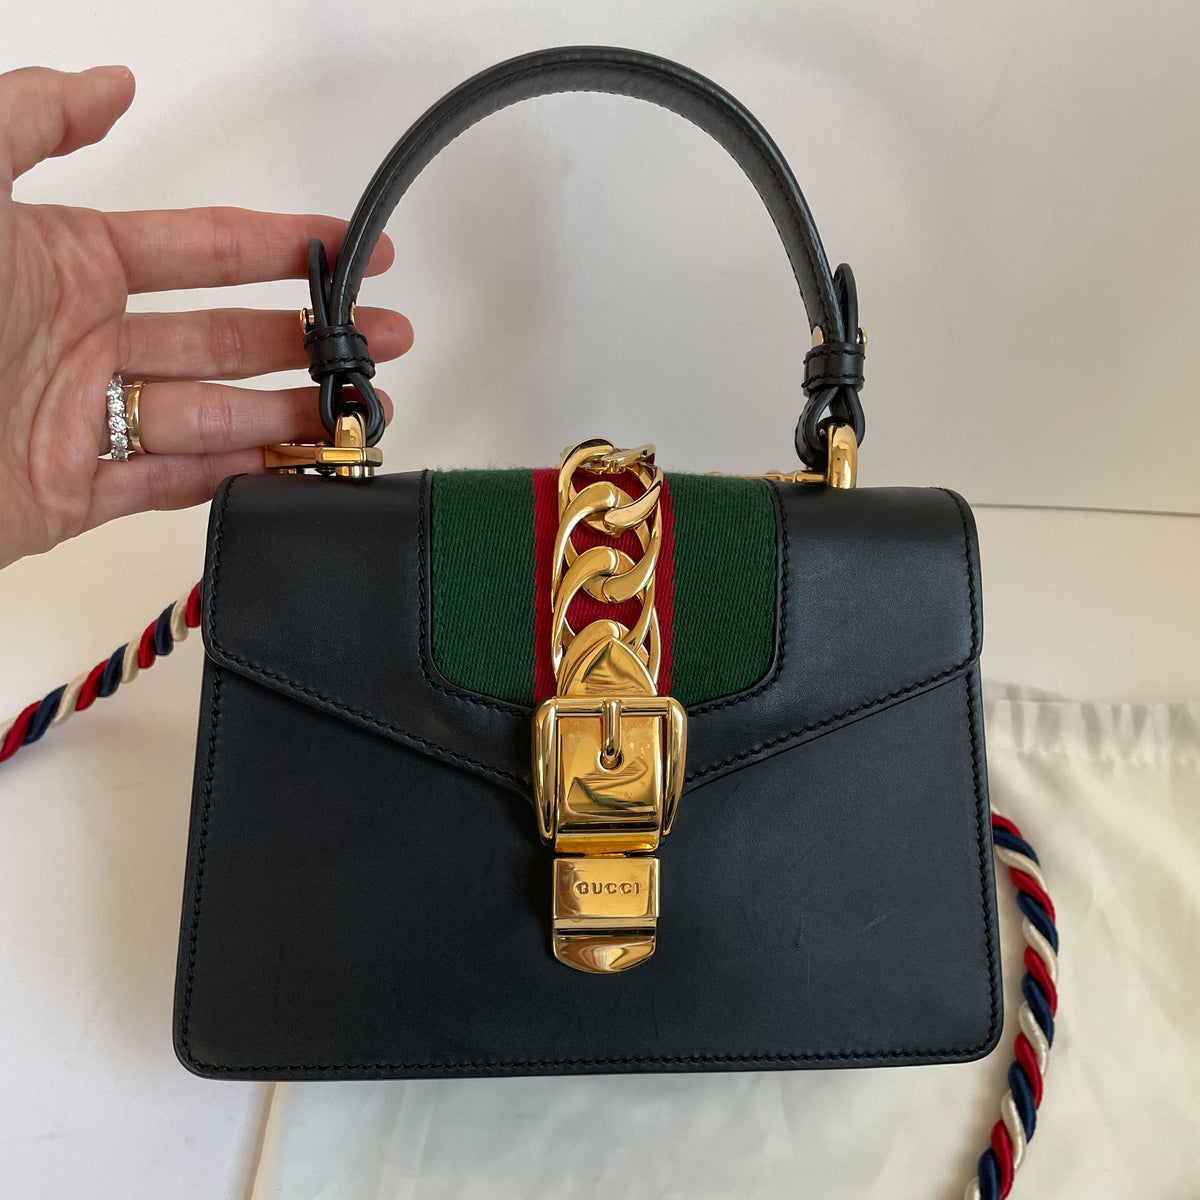 Gucci Womens Sylvie Mini Bag Black Velvet / Green / Red – Luxe Collective